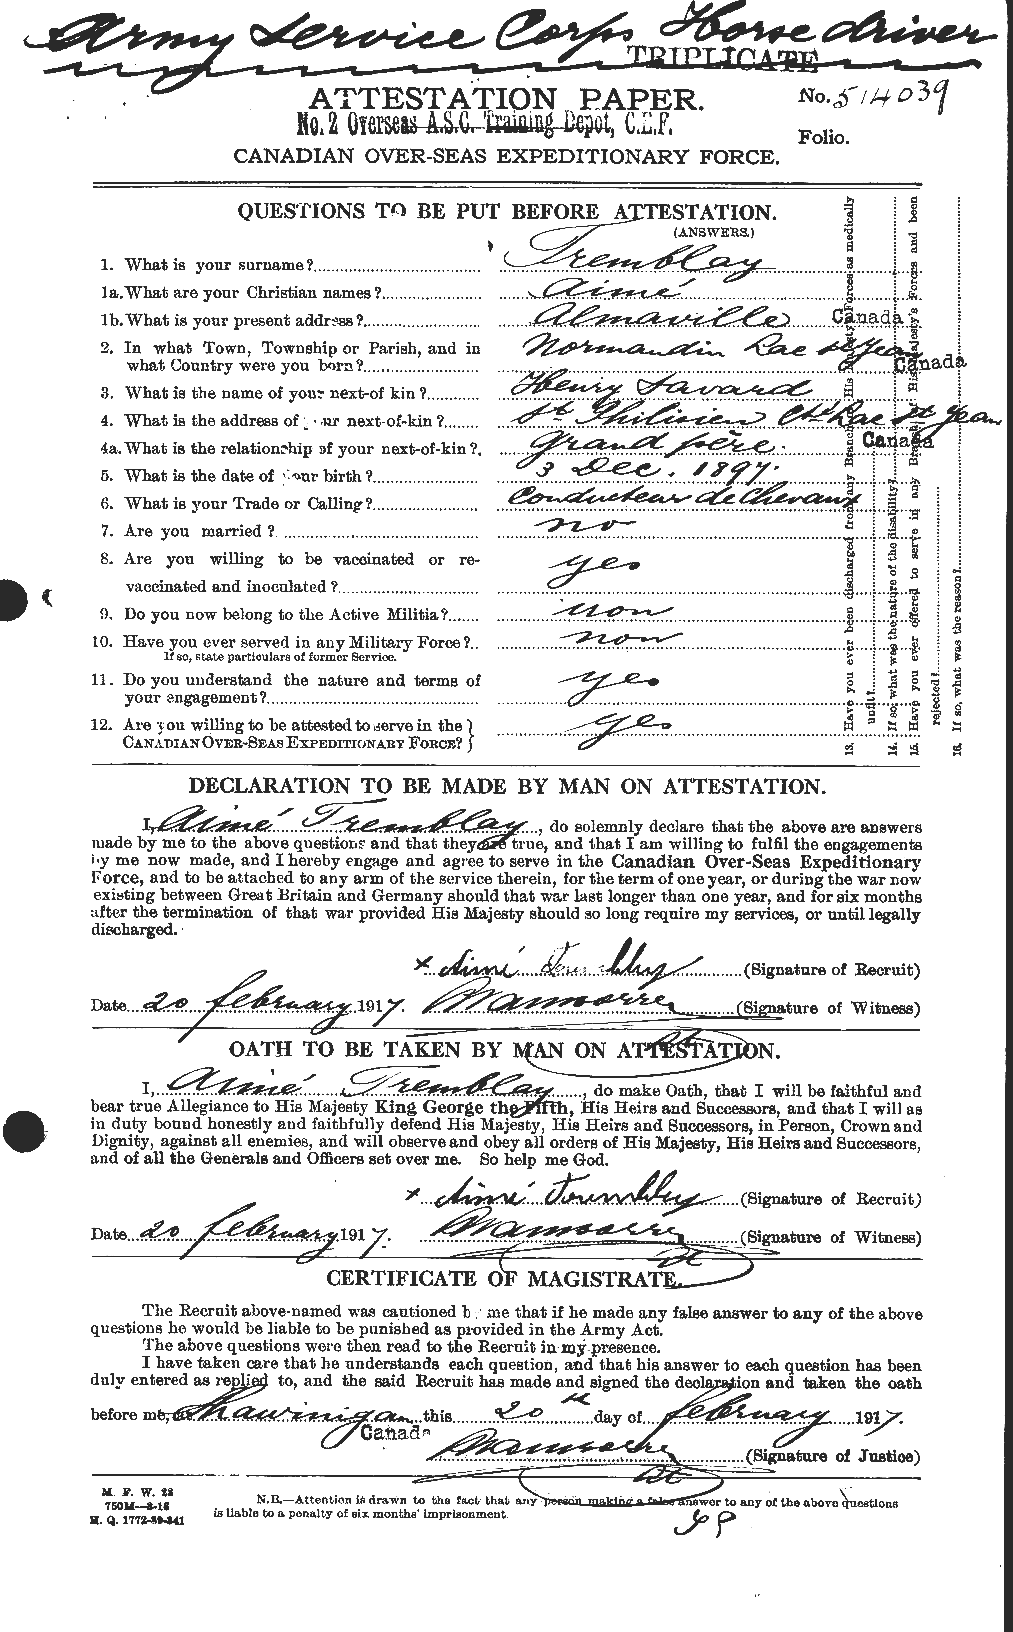 Personnel Records of the First World War - CEF 637568a